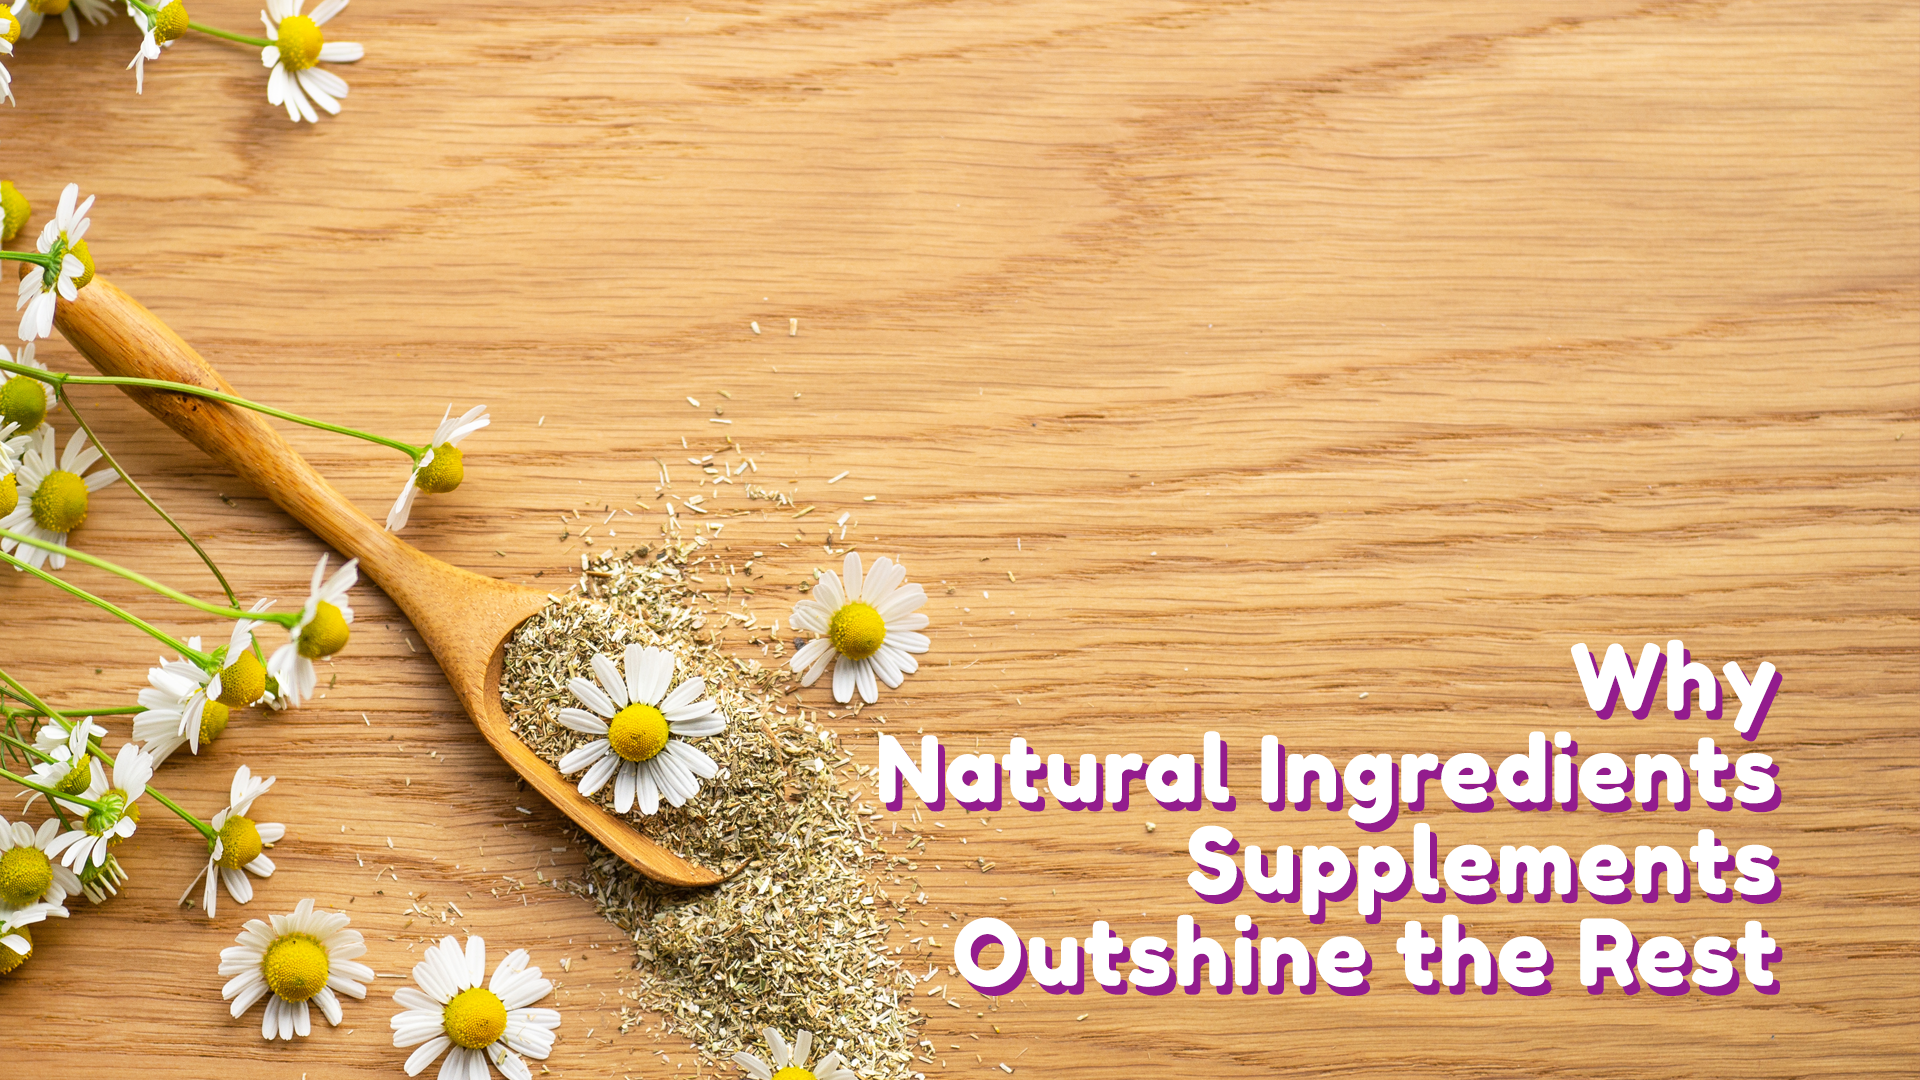 Why Natural Ingredients Supplements Outshine the Rest